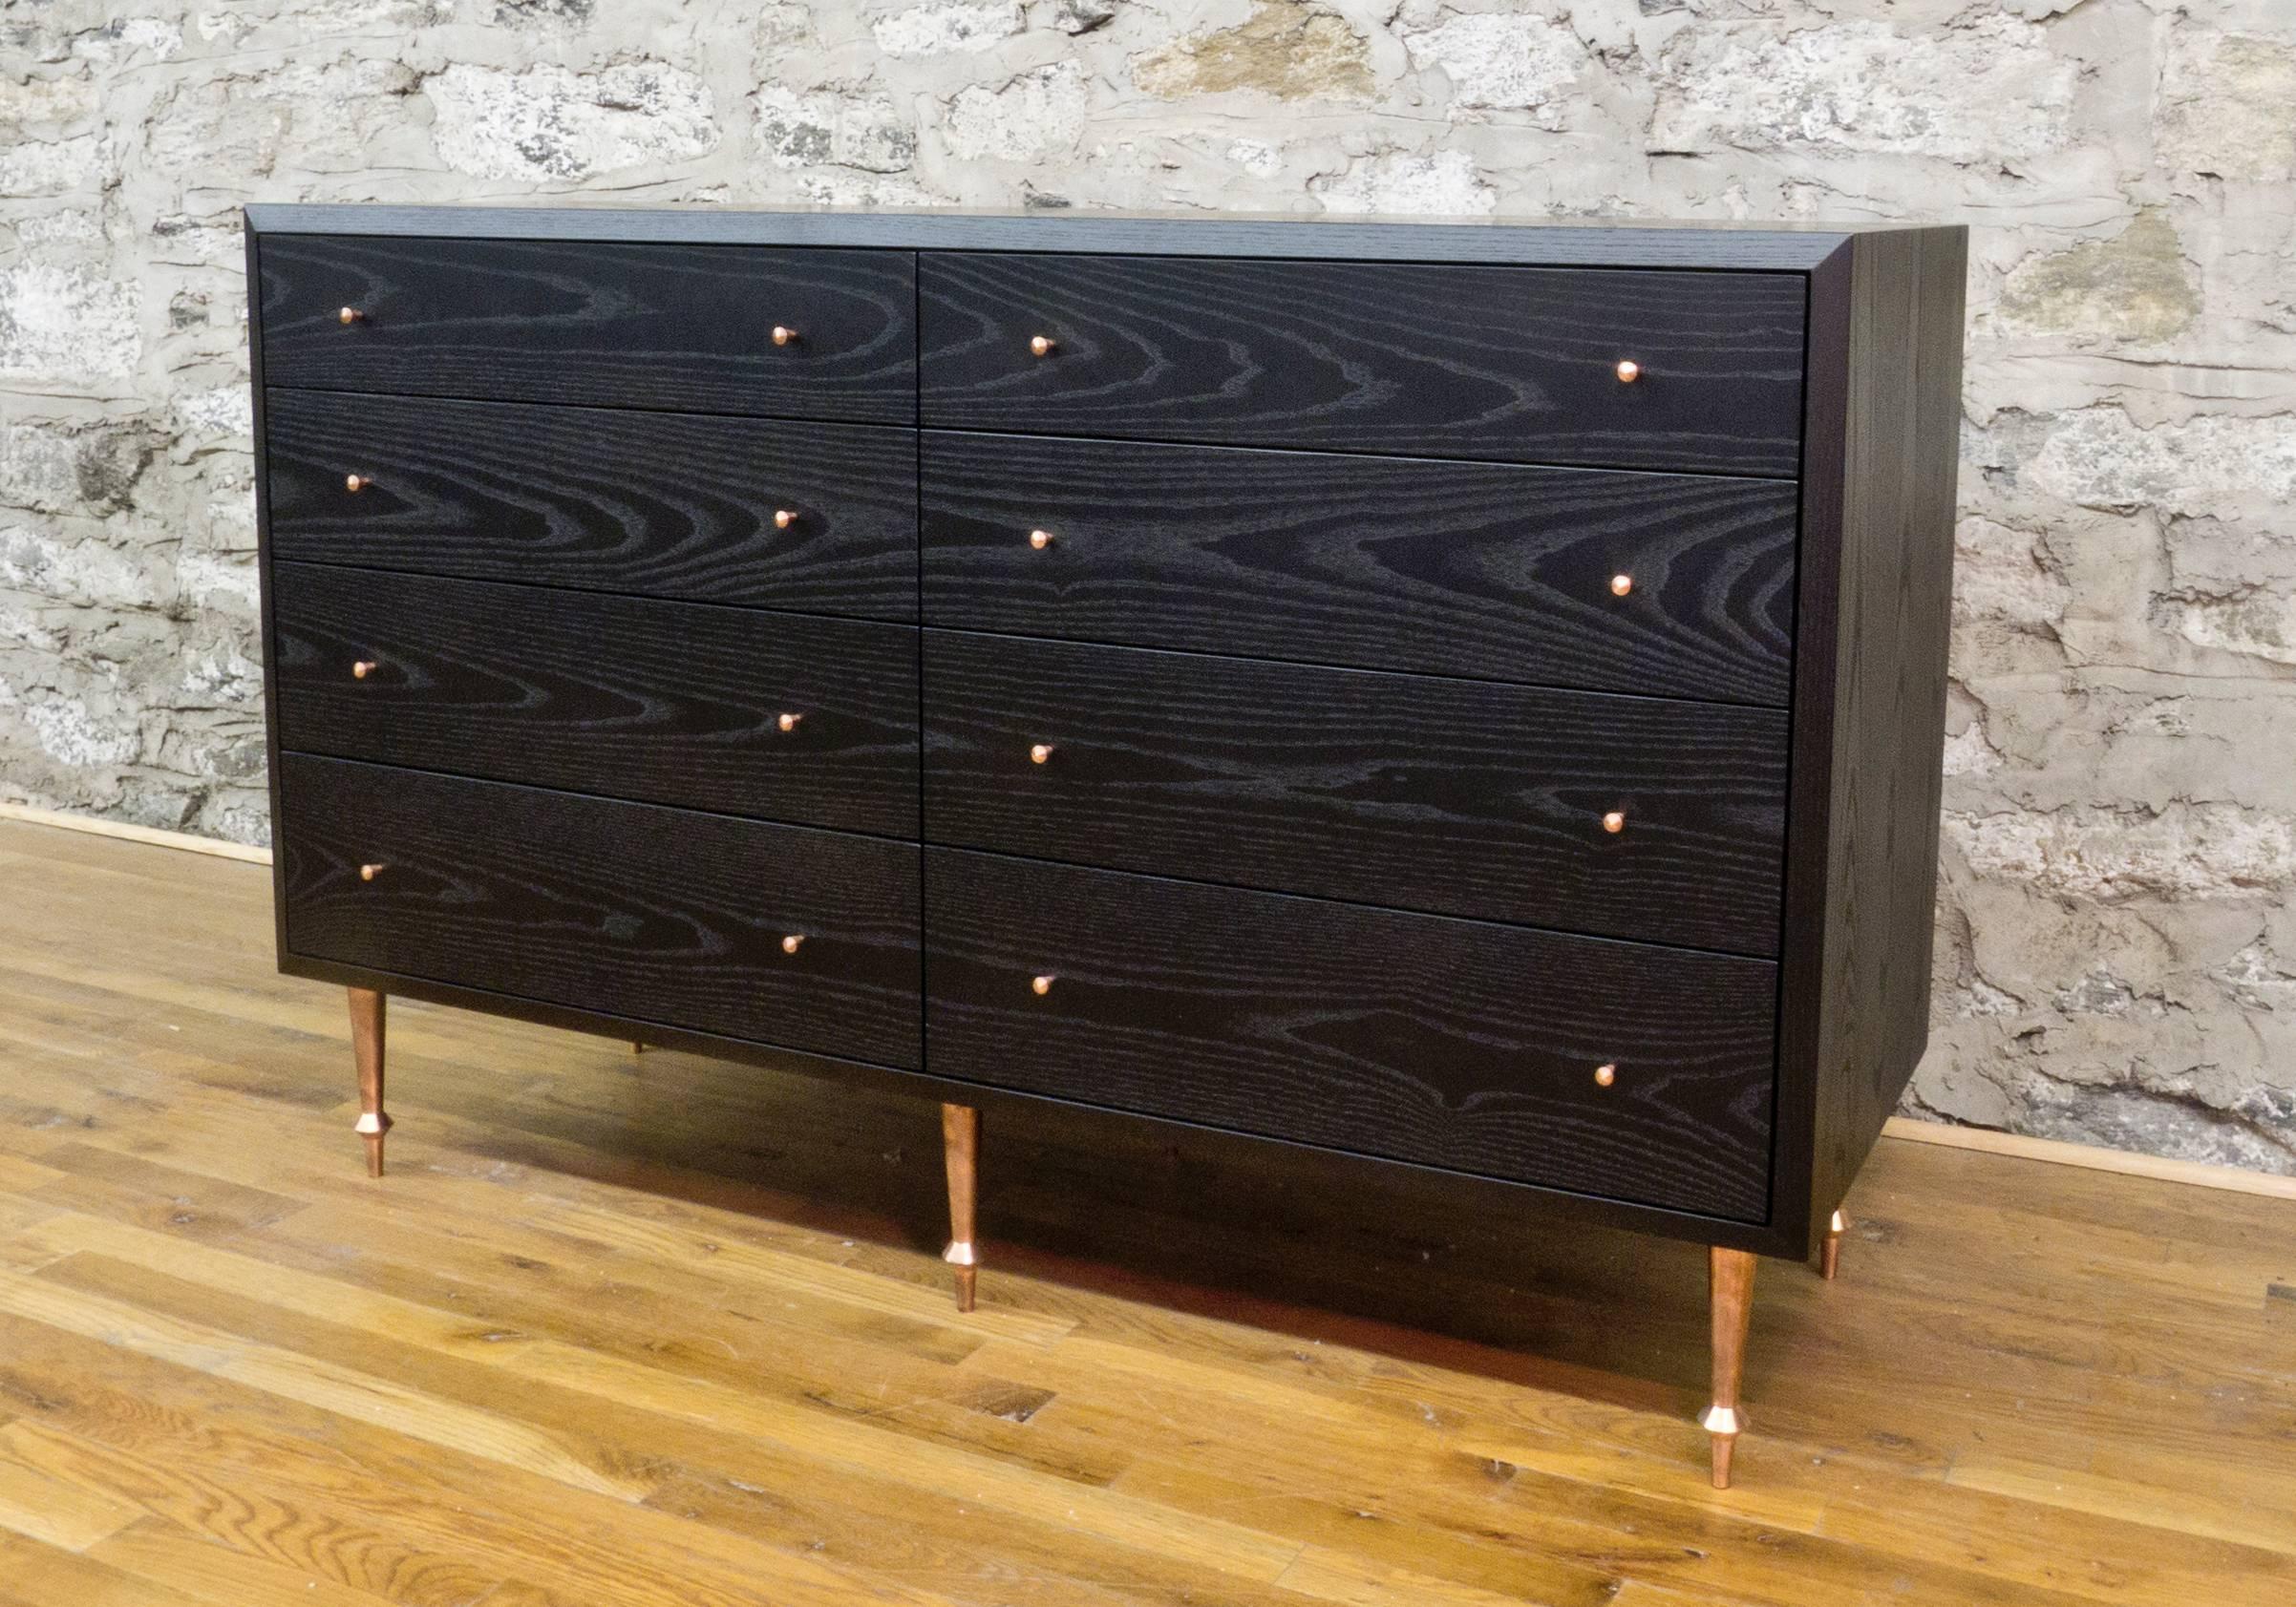 As shown:
Solid blackened ash with turned copper legs and drawer pulls and solid walnut with turned brass legs and pulls.
Fabric lined drawers by request at an additional fee.
Waterborne or oil and wax finish.
Dimensions: 36” H x 56” W x 20”